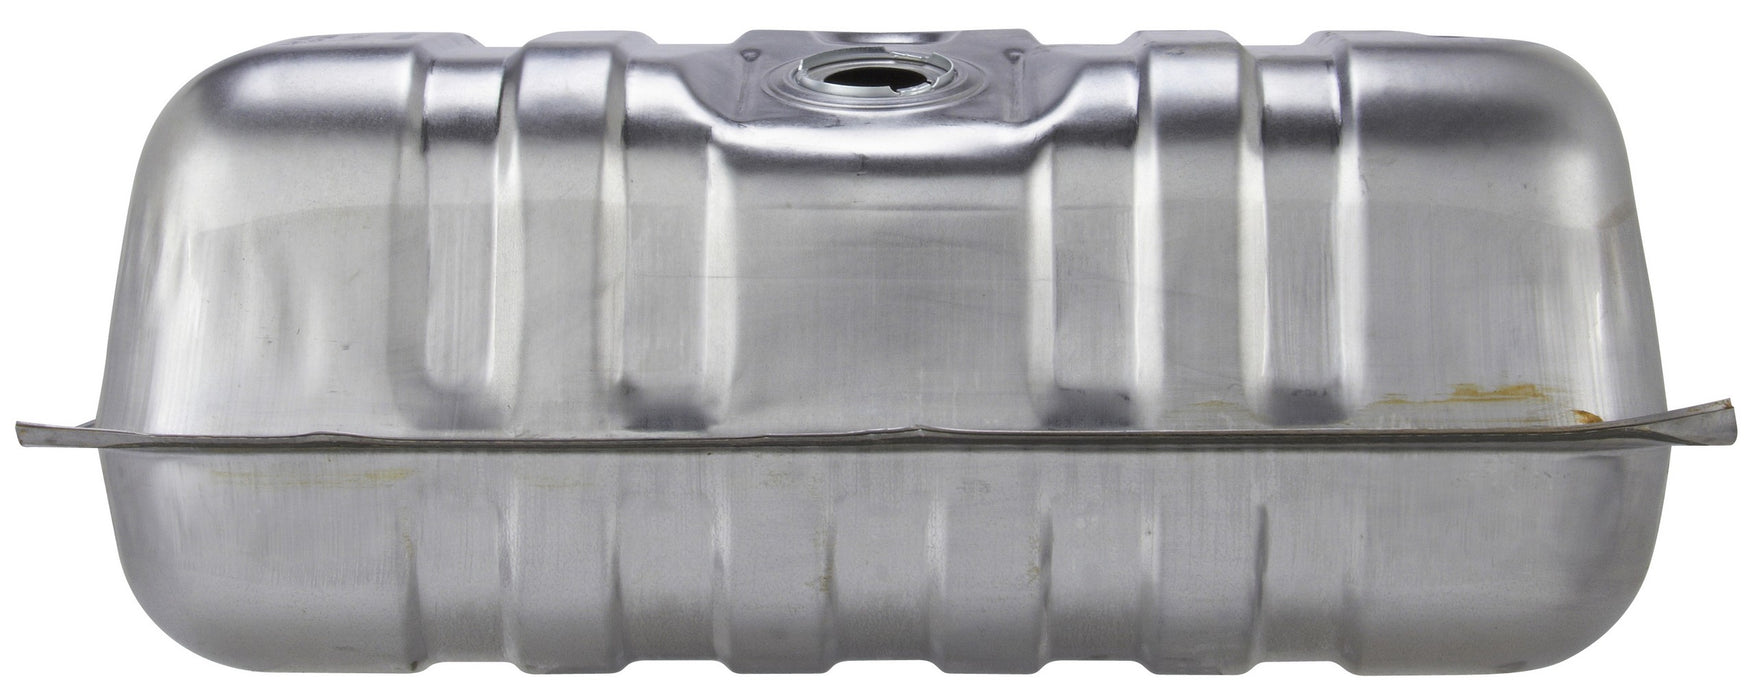 Fuel Tank for Ford Bronco 1983 1982 1981 1980 - Spectra F9C